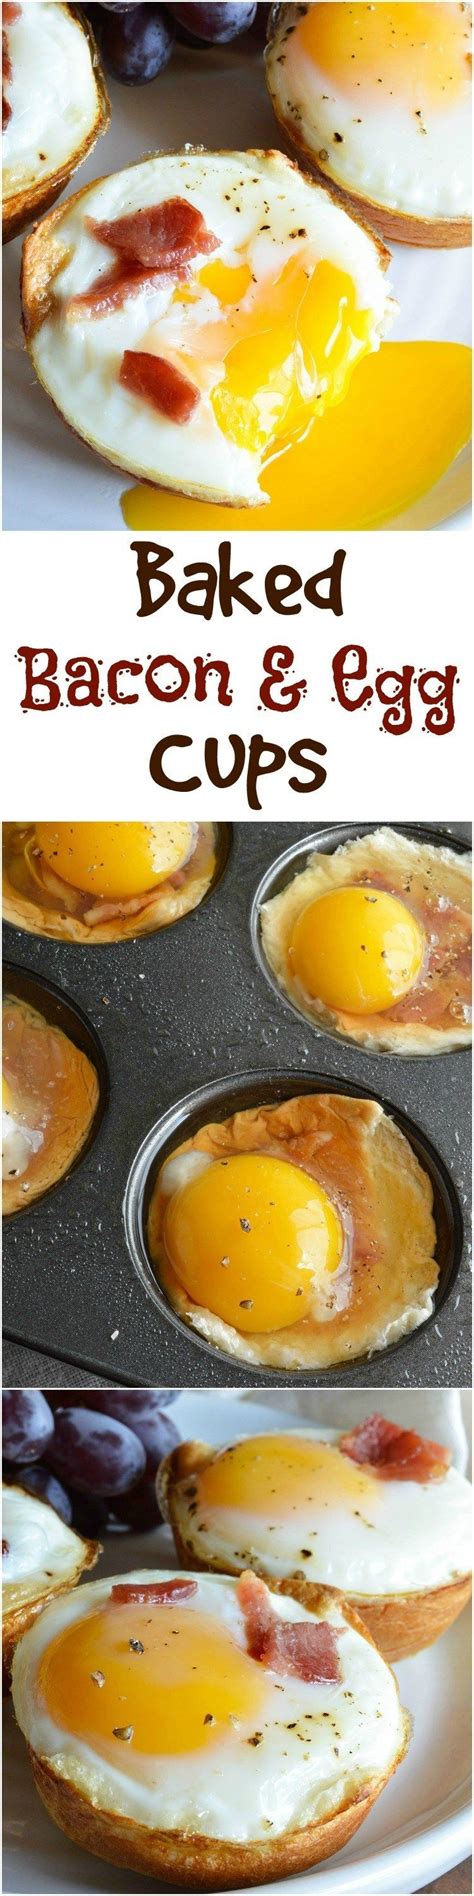 Bacon And Egg Breakfast Cups This Easy Breakfast Recipe Is Made With